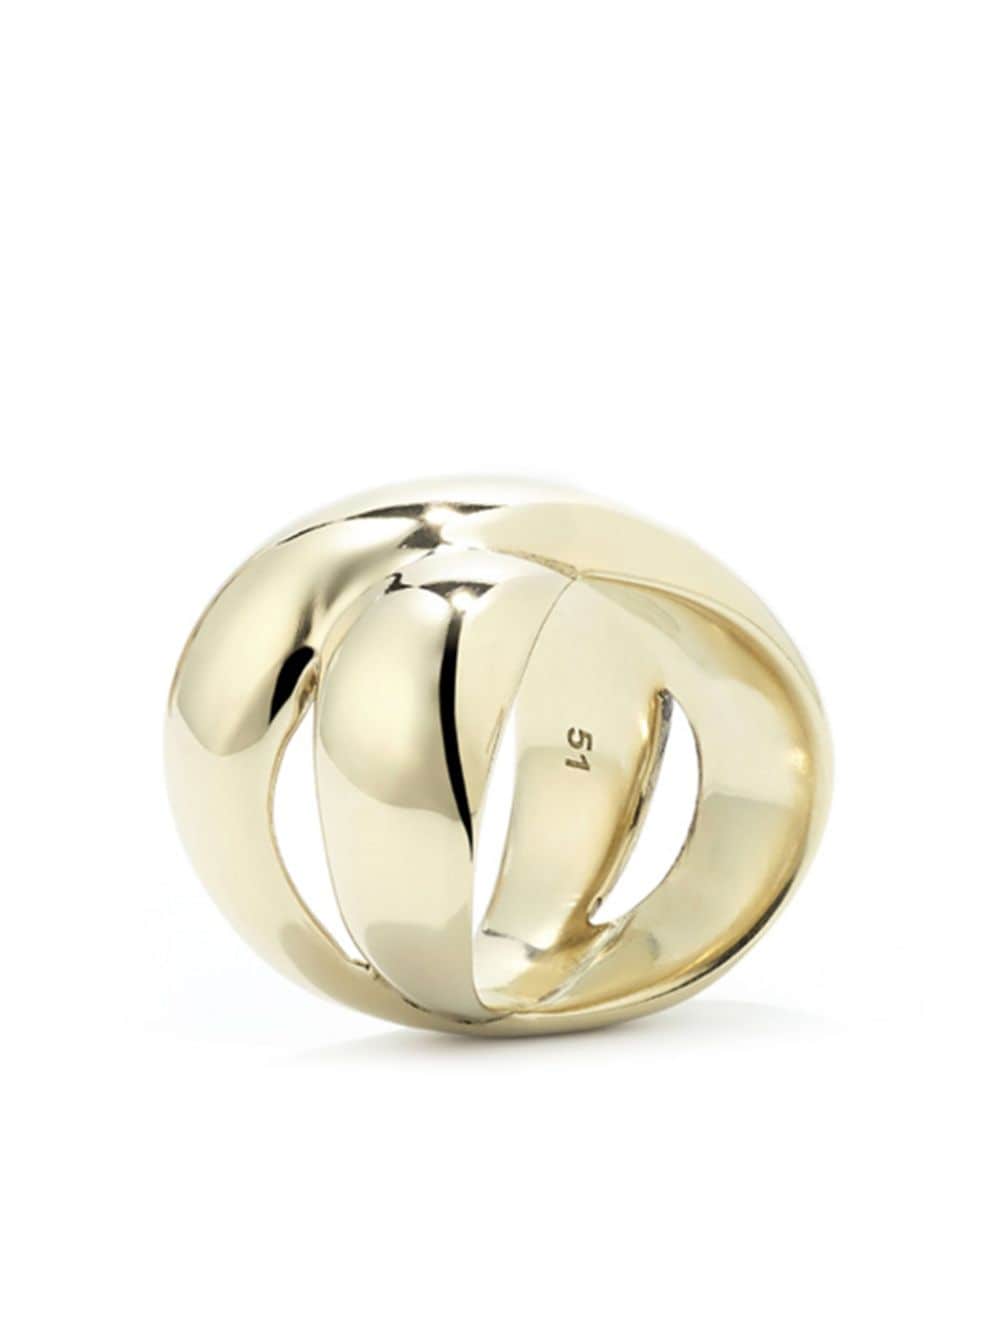 Lhassa intertwined ring